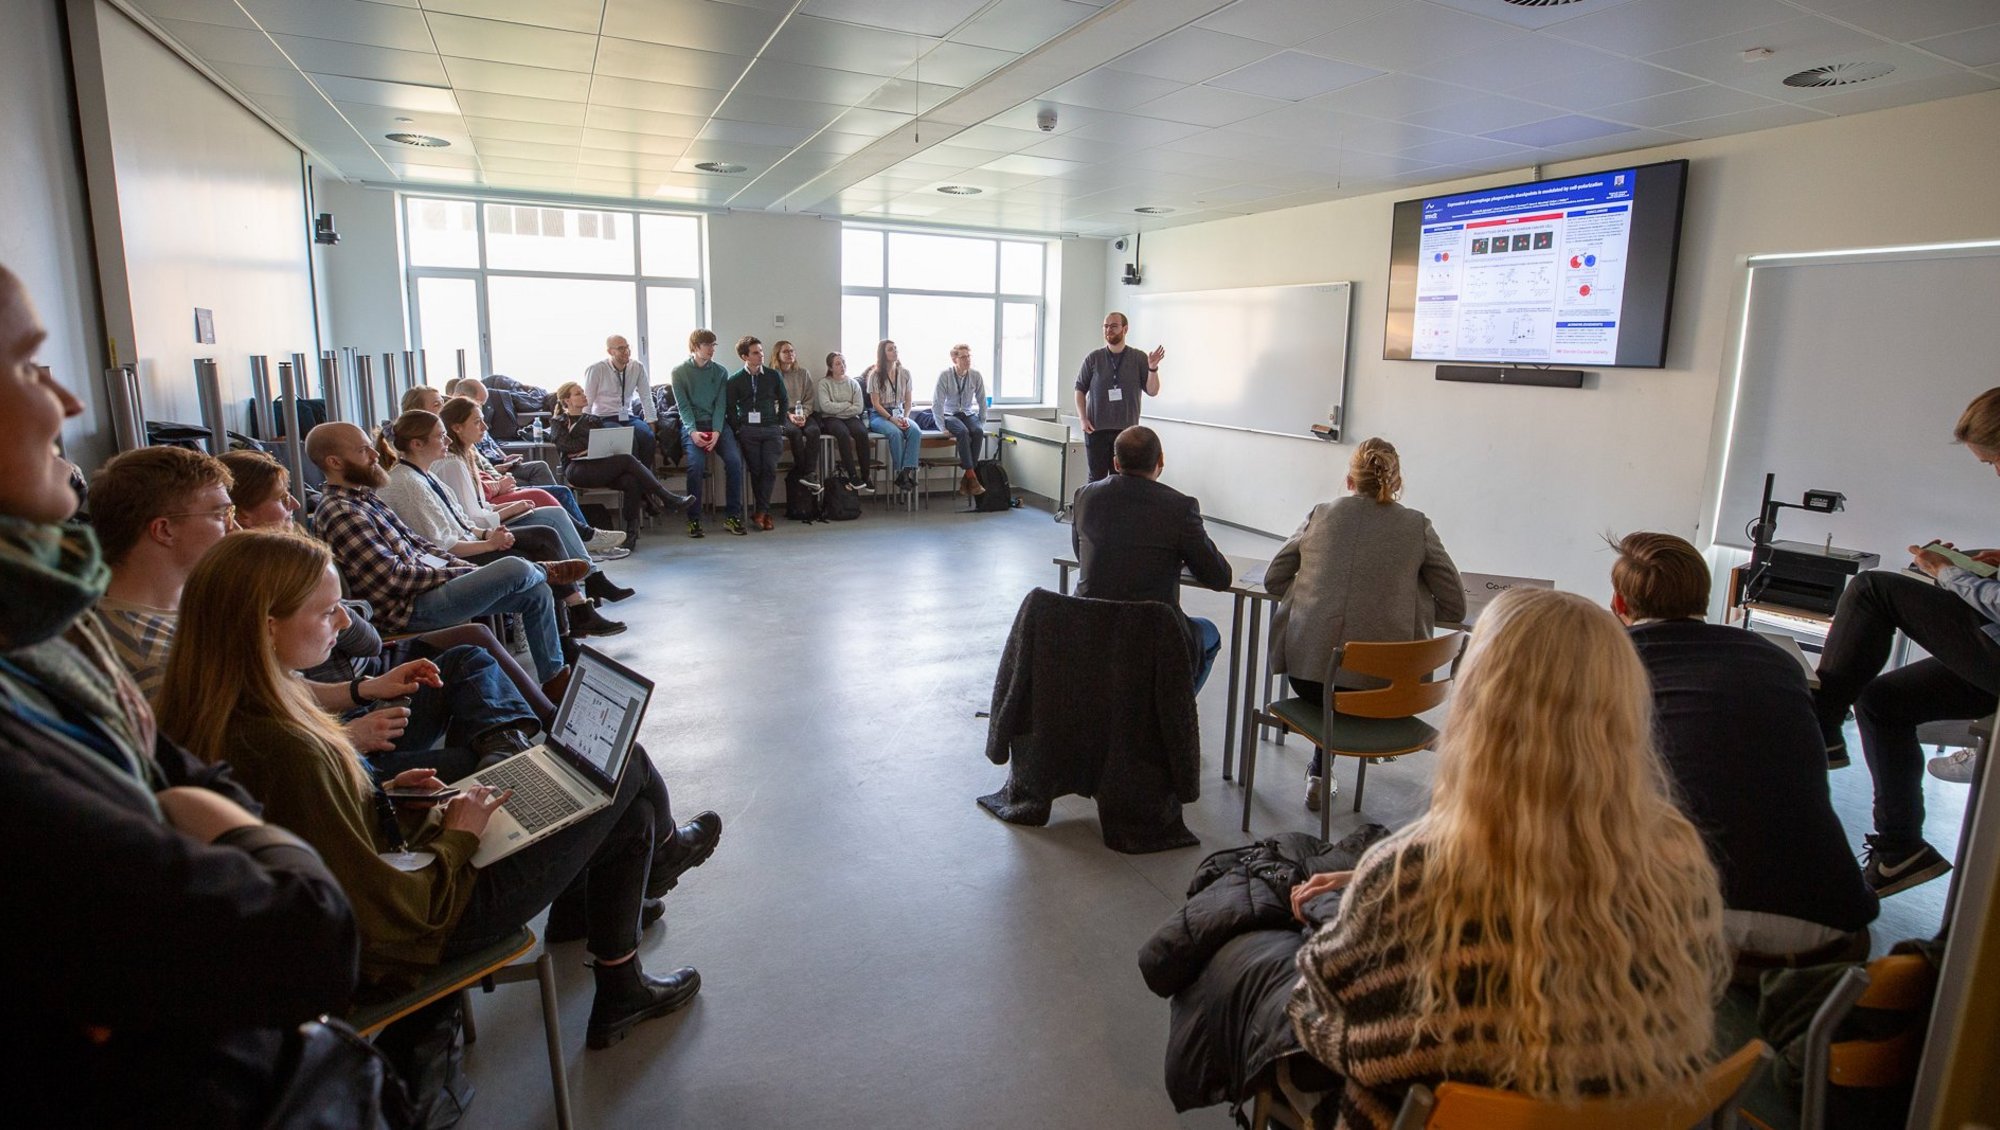 The rest of the day was spent with many poster presentations and scientific flash talks by the PhD Students at Health. Photo: Lars Kruse, AU Photo.